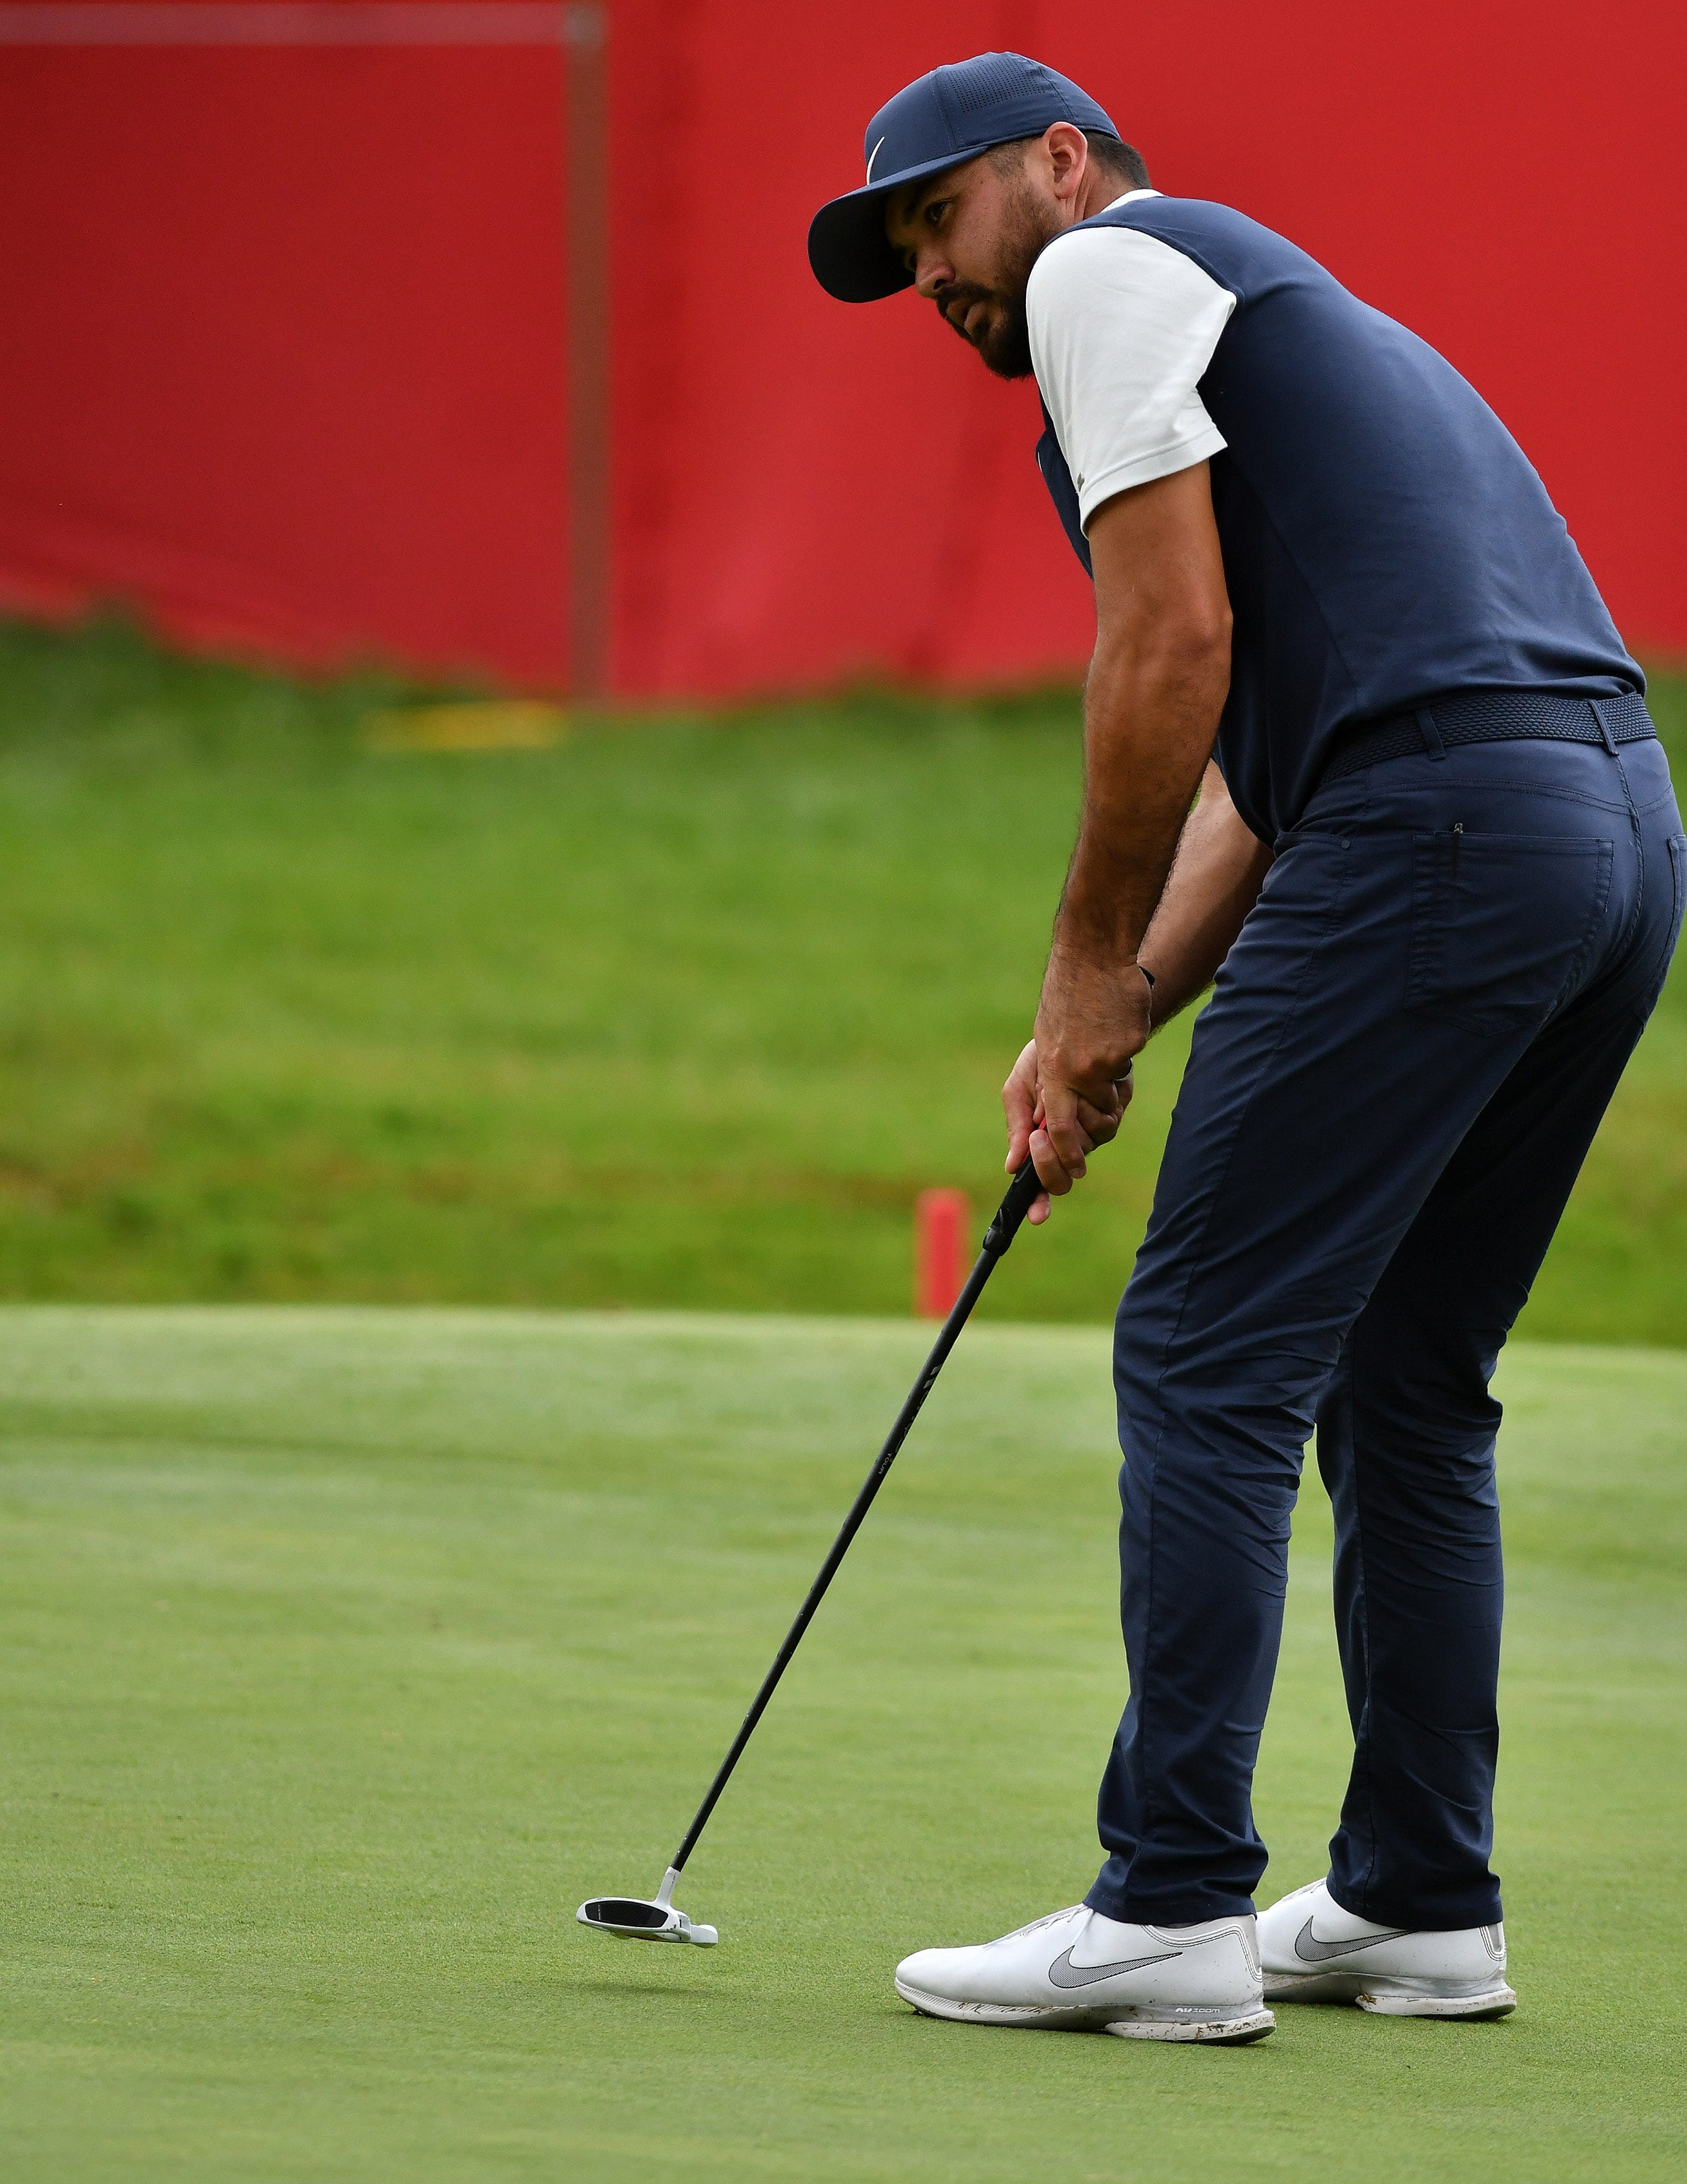 Jason Day putts on the 18th green.